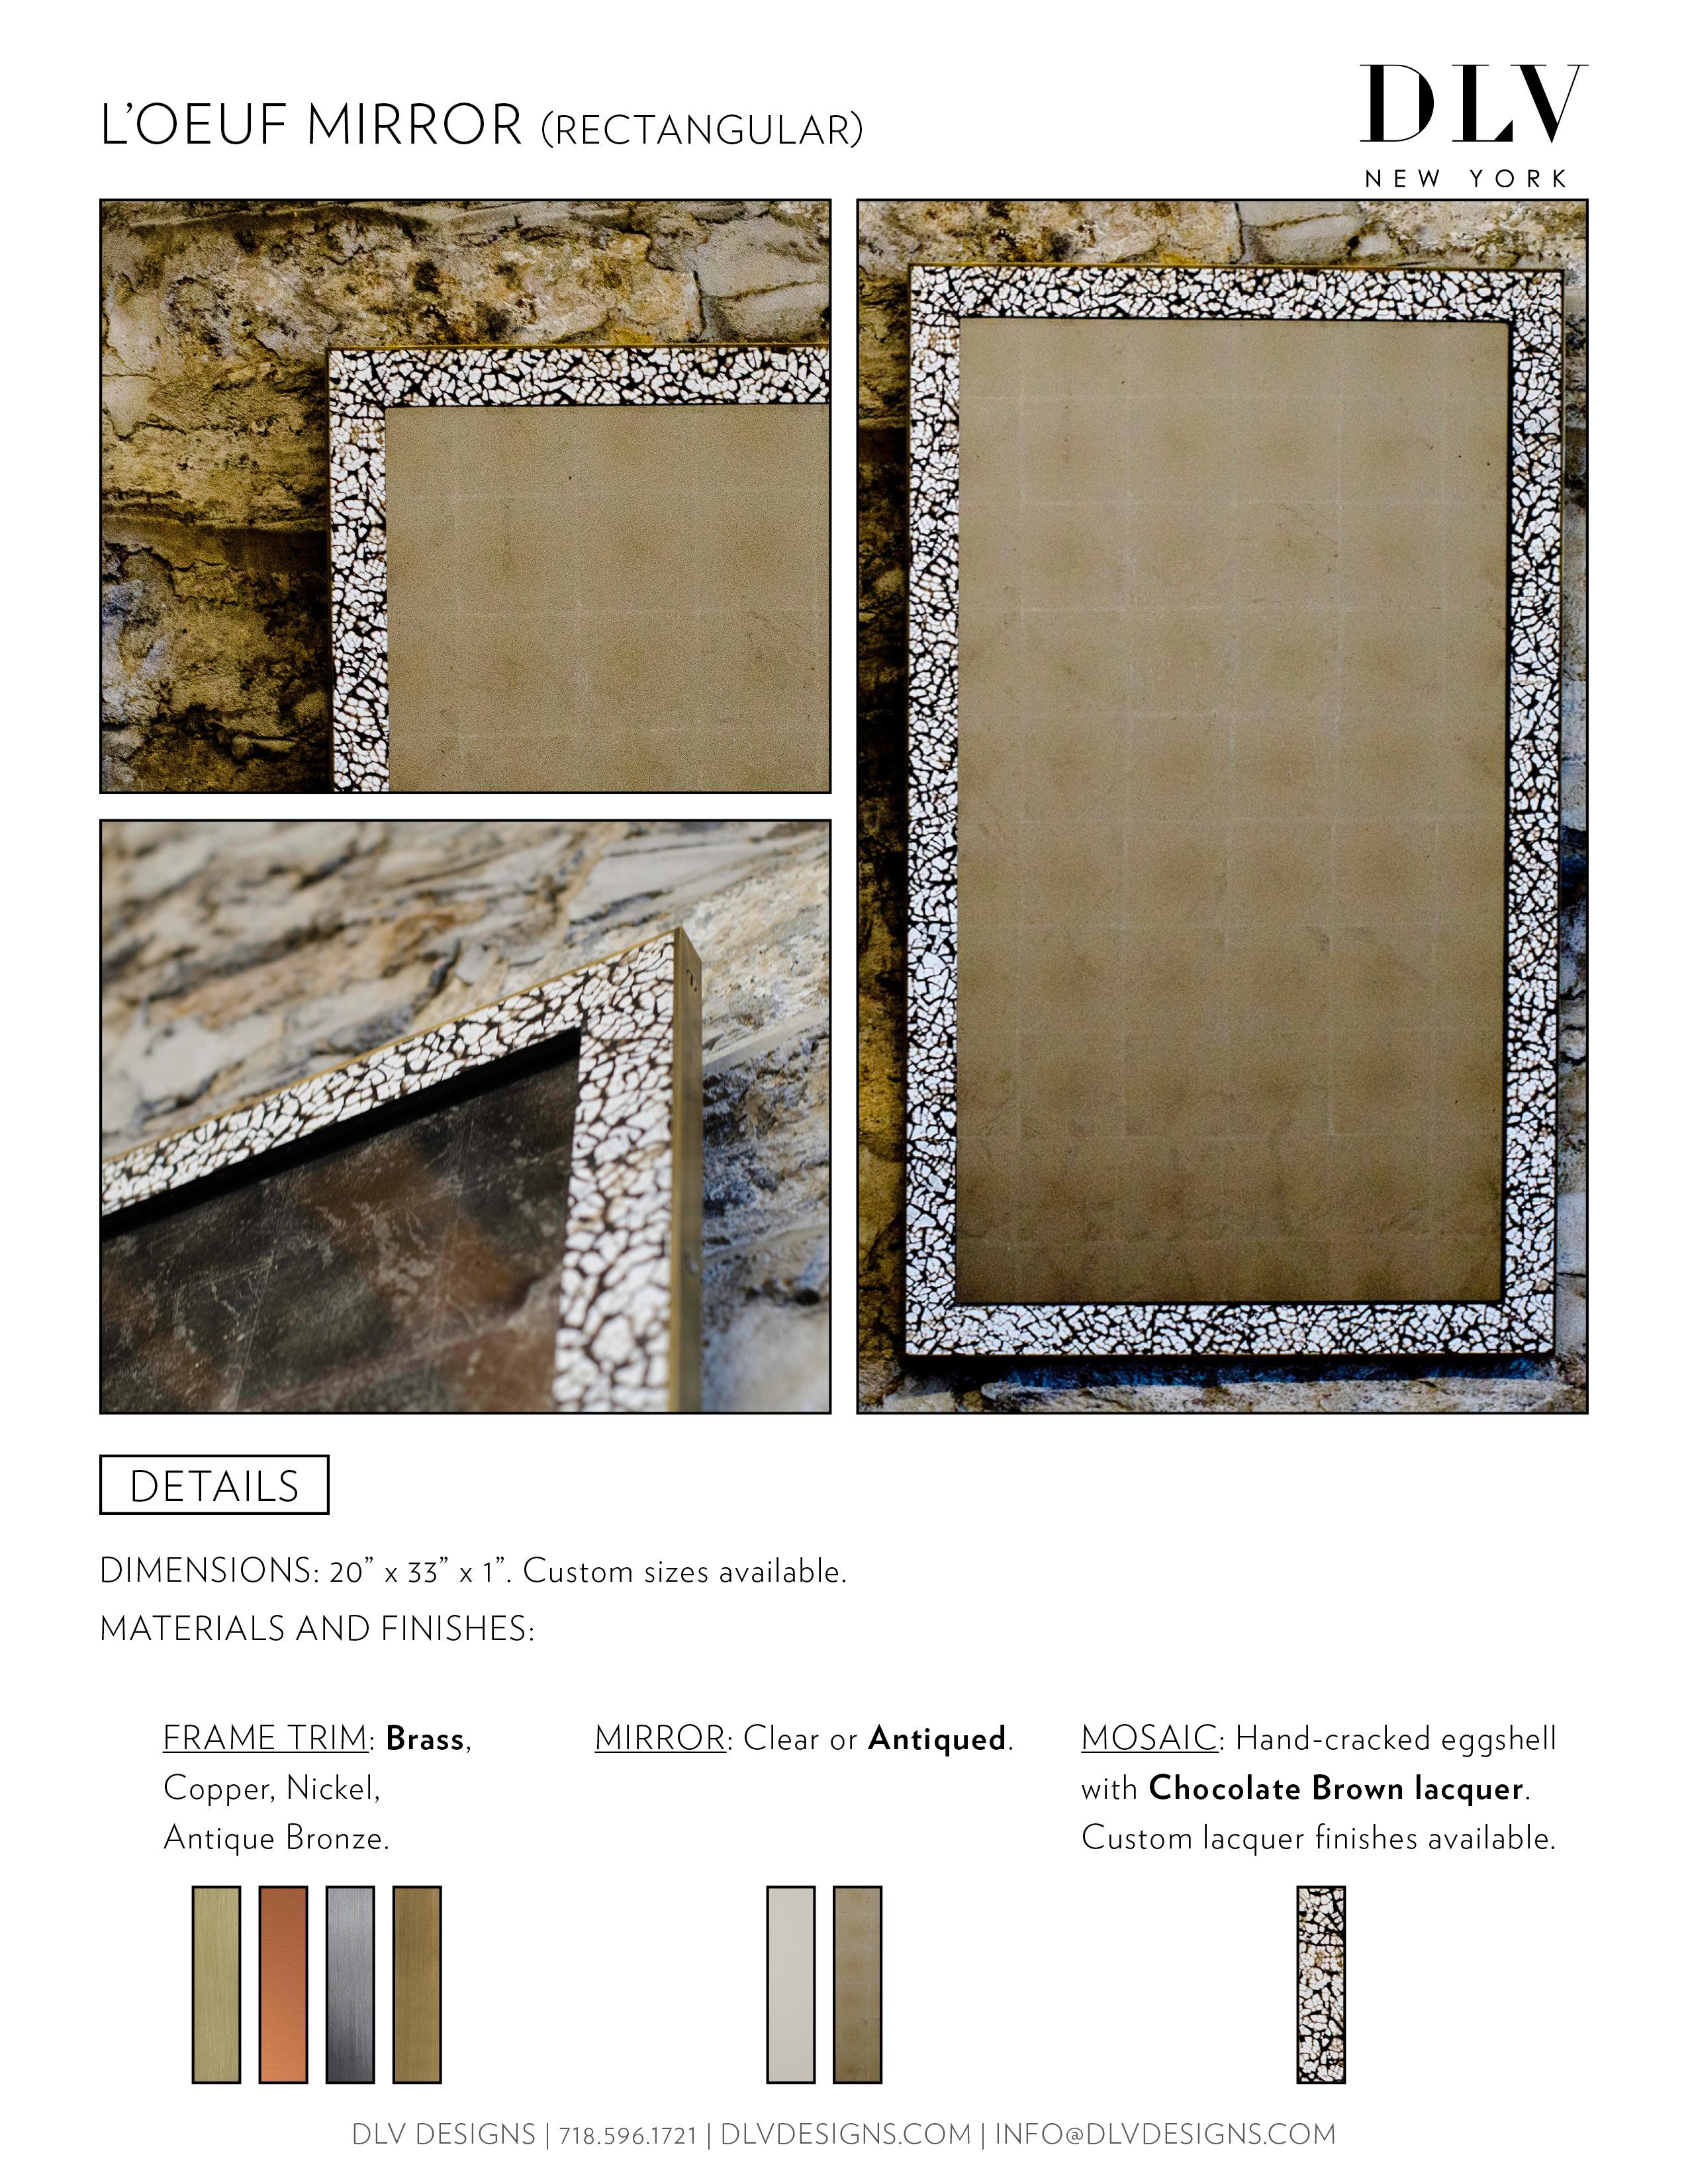 Hand-cracked eggshell and lacquer frame, trimmed in brass or antique bronze. Eglomisé Mirror available.
DIMENSIONS: 20